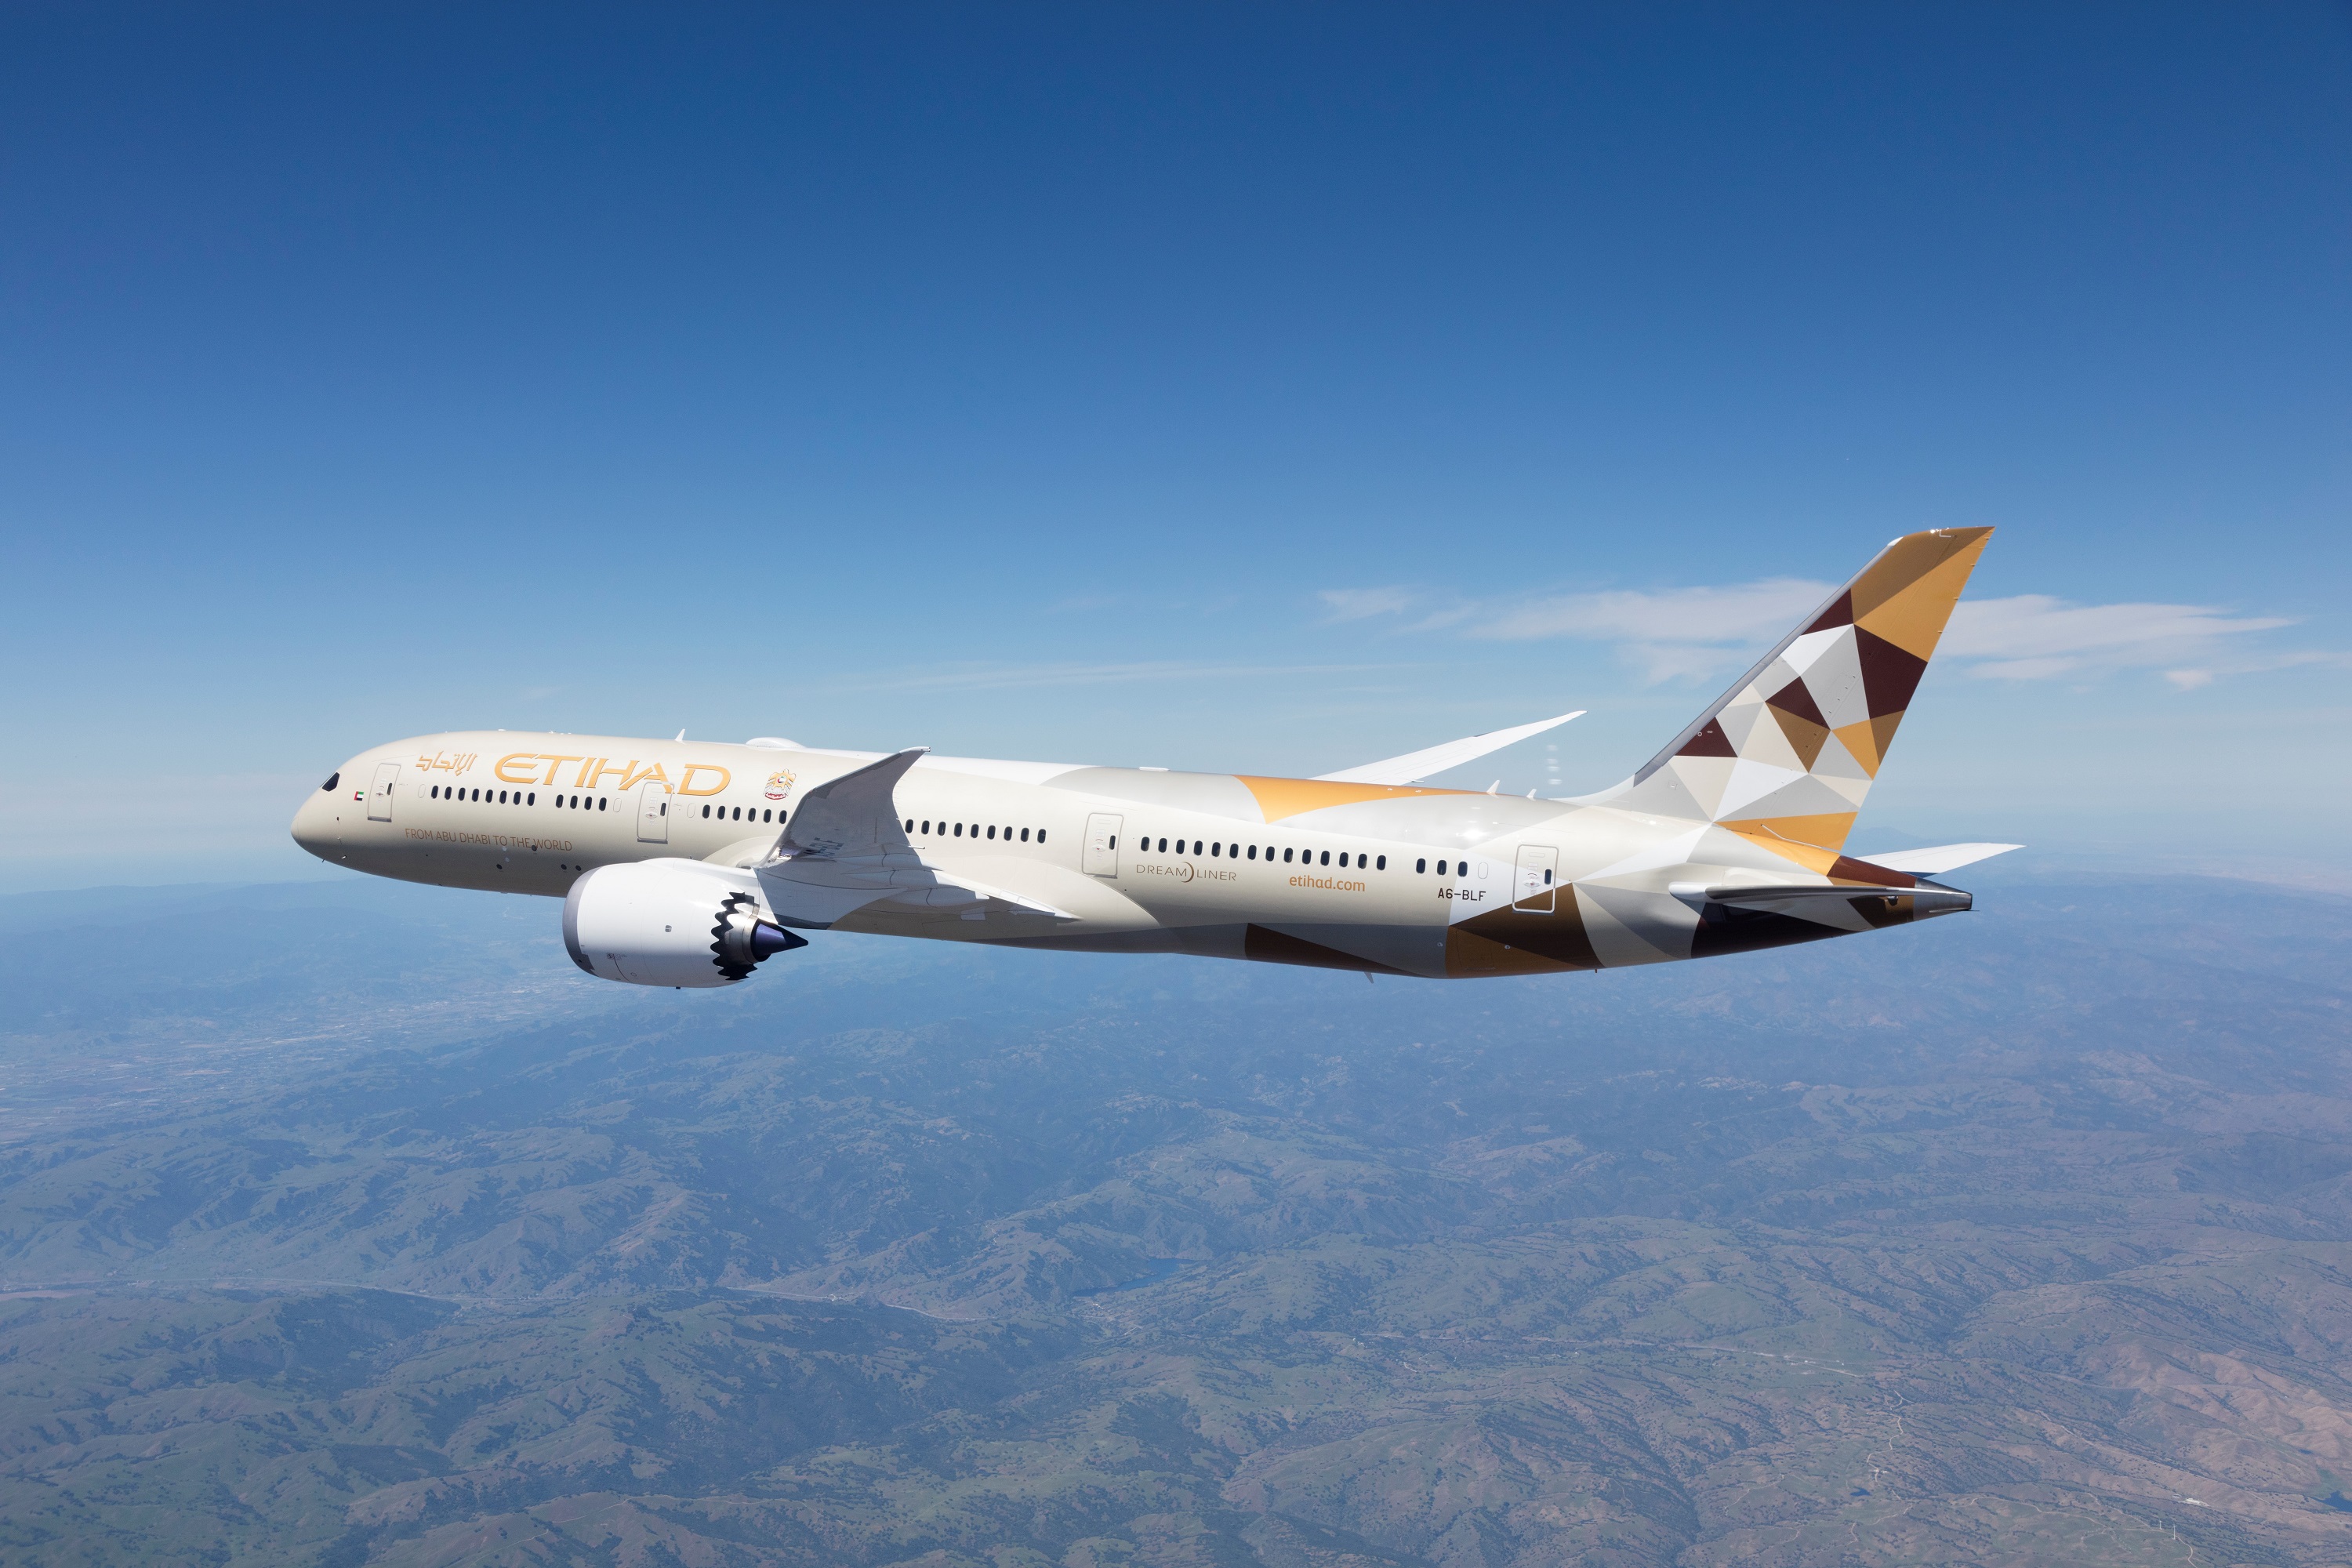 Etihad Airways To Resume Special Passenger Services To And From Abu Dhabi To Six Destinations In India